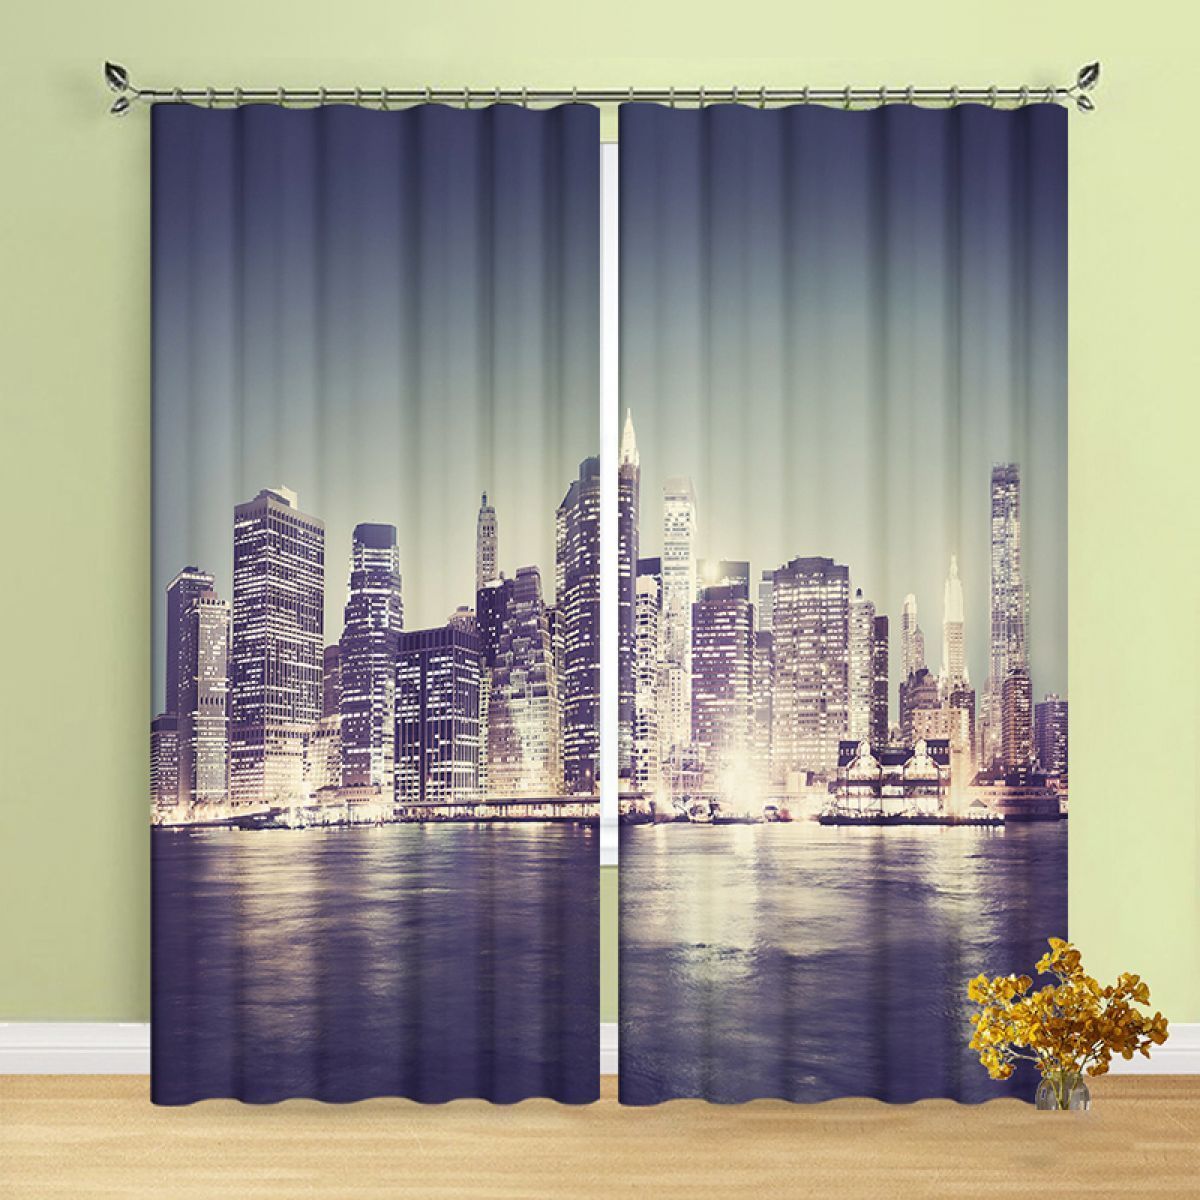 3d Tall Building Near River At Night Printed Window Curtain Home Decor